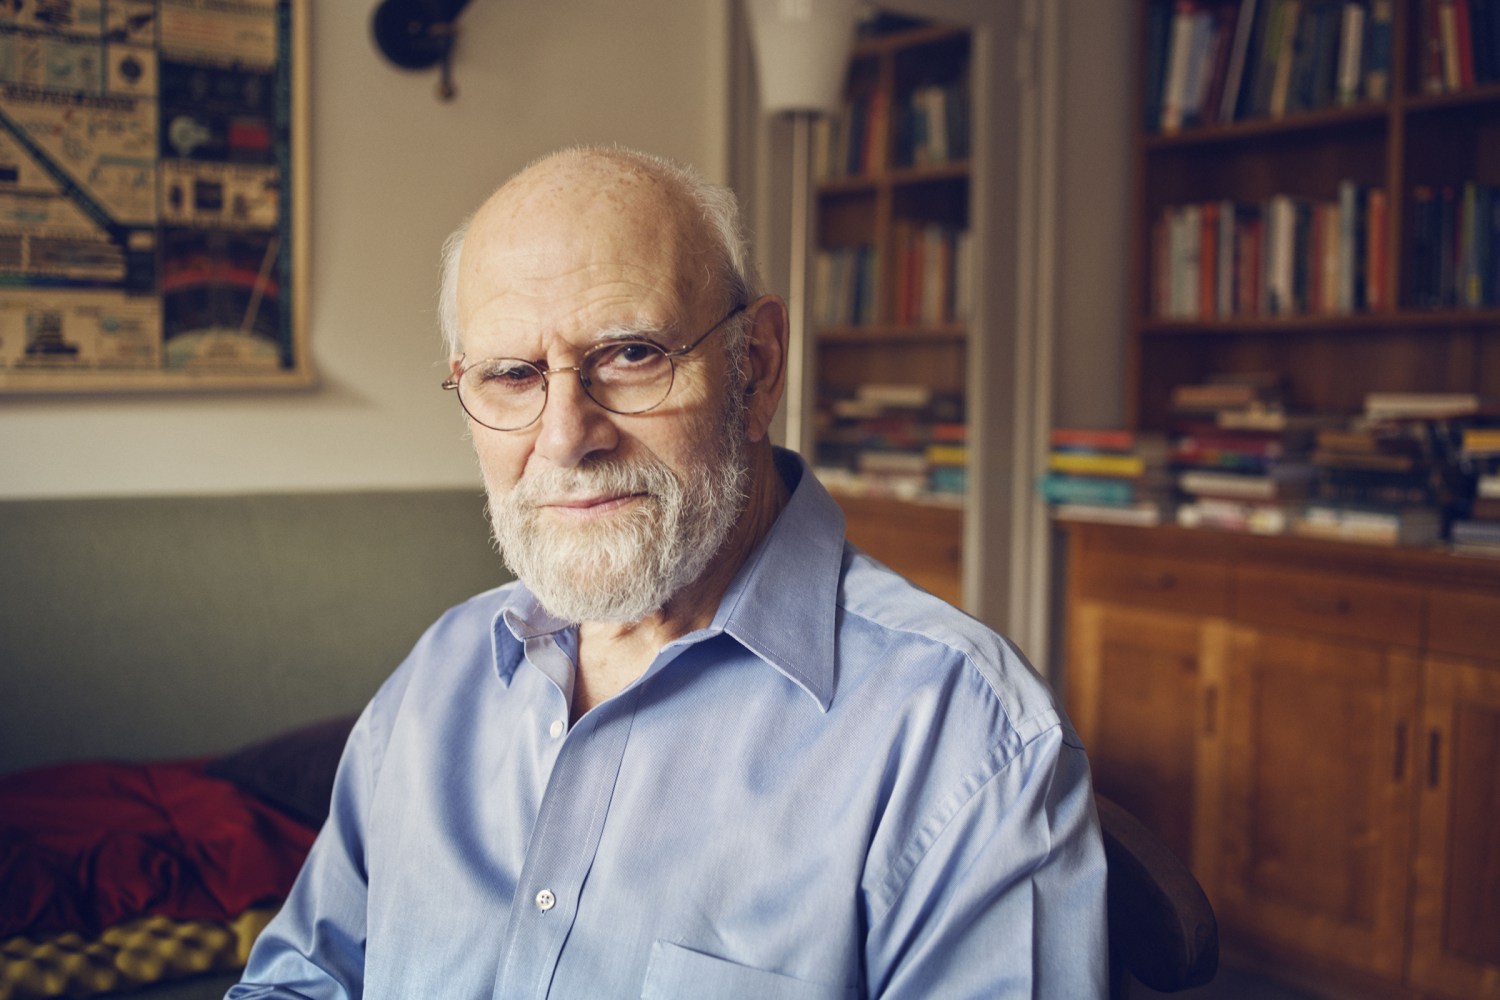 With months to live, neurologist Oliver Sacks gave a master class on how to  die